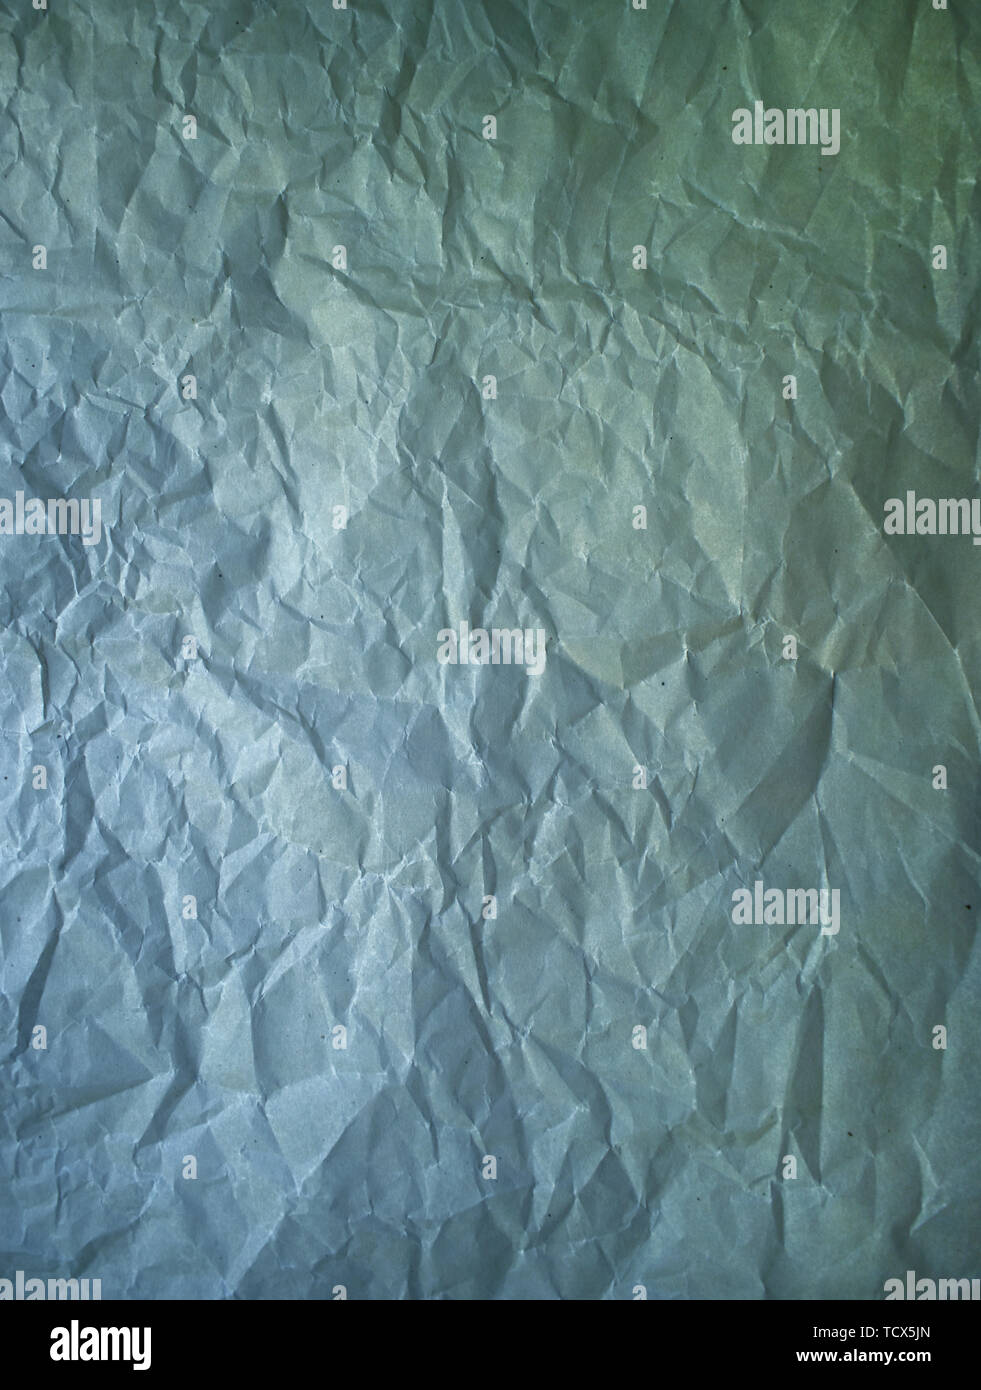 Old crumpled paper vintage texture. Rough wrinkled dark green blue color shadows sheet. Textured grunge background with copy space Stock Photo